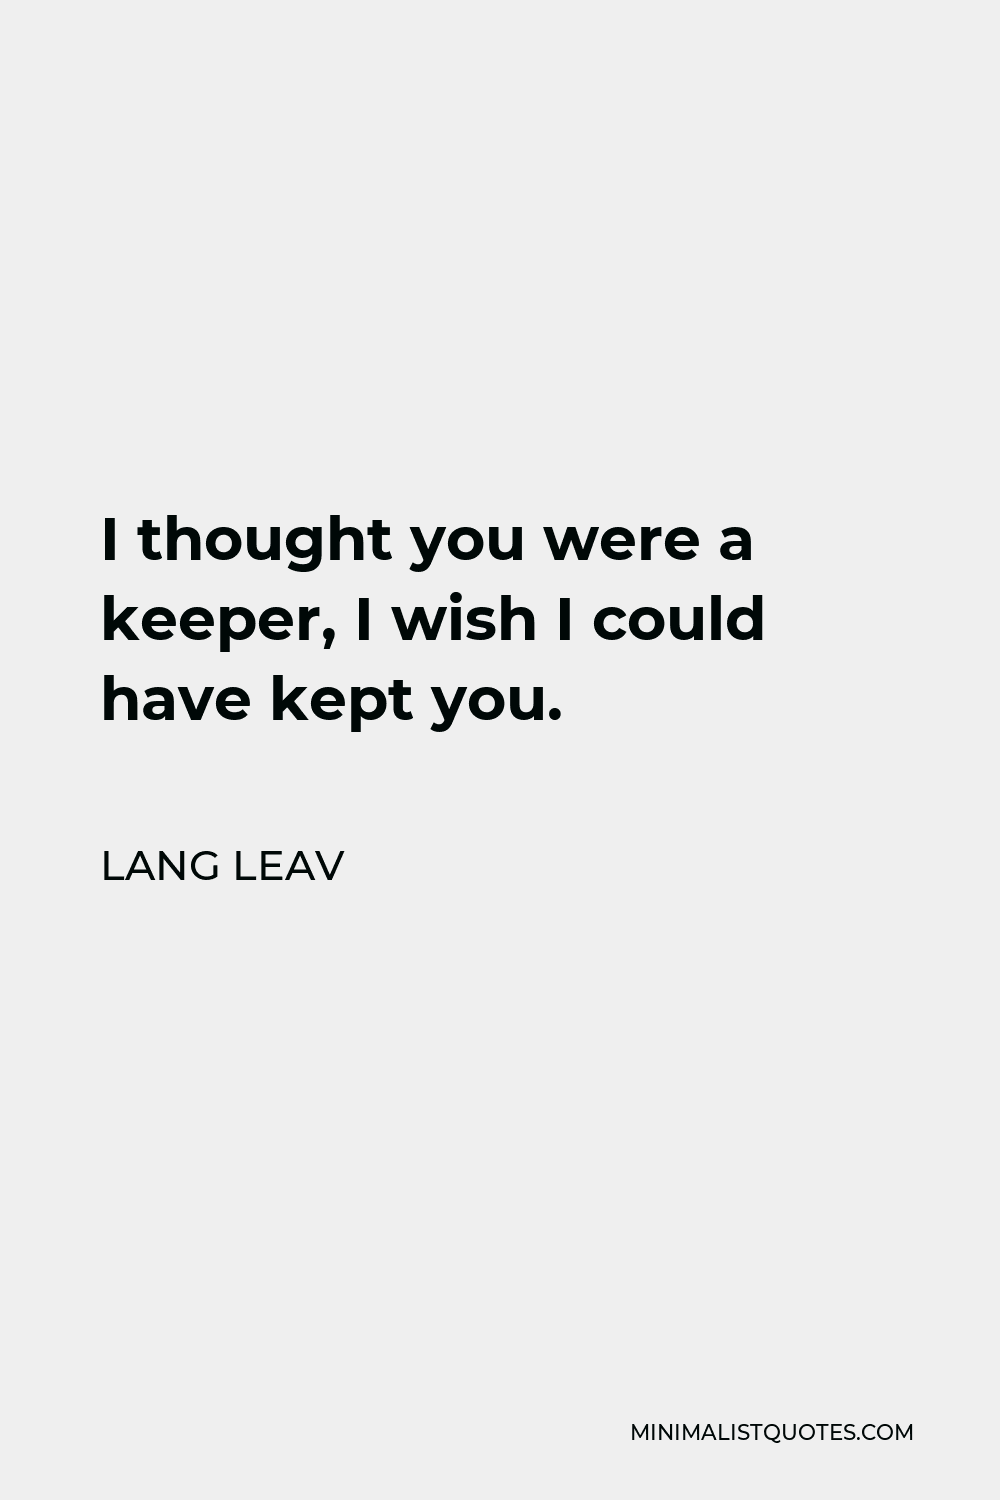 Lang Leav Quote - I thought you were a keeper, I wish I could have kept you.